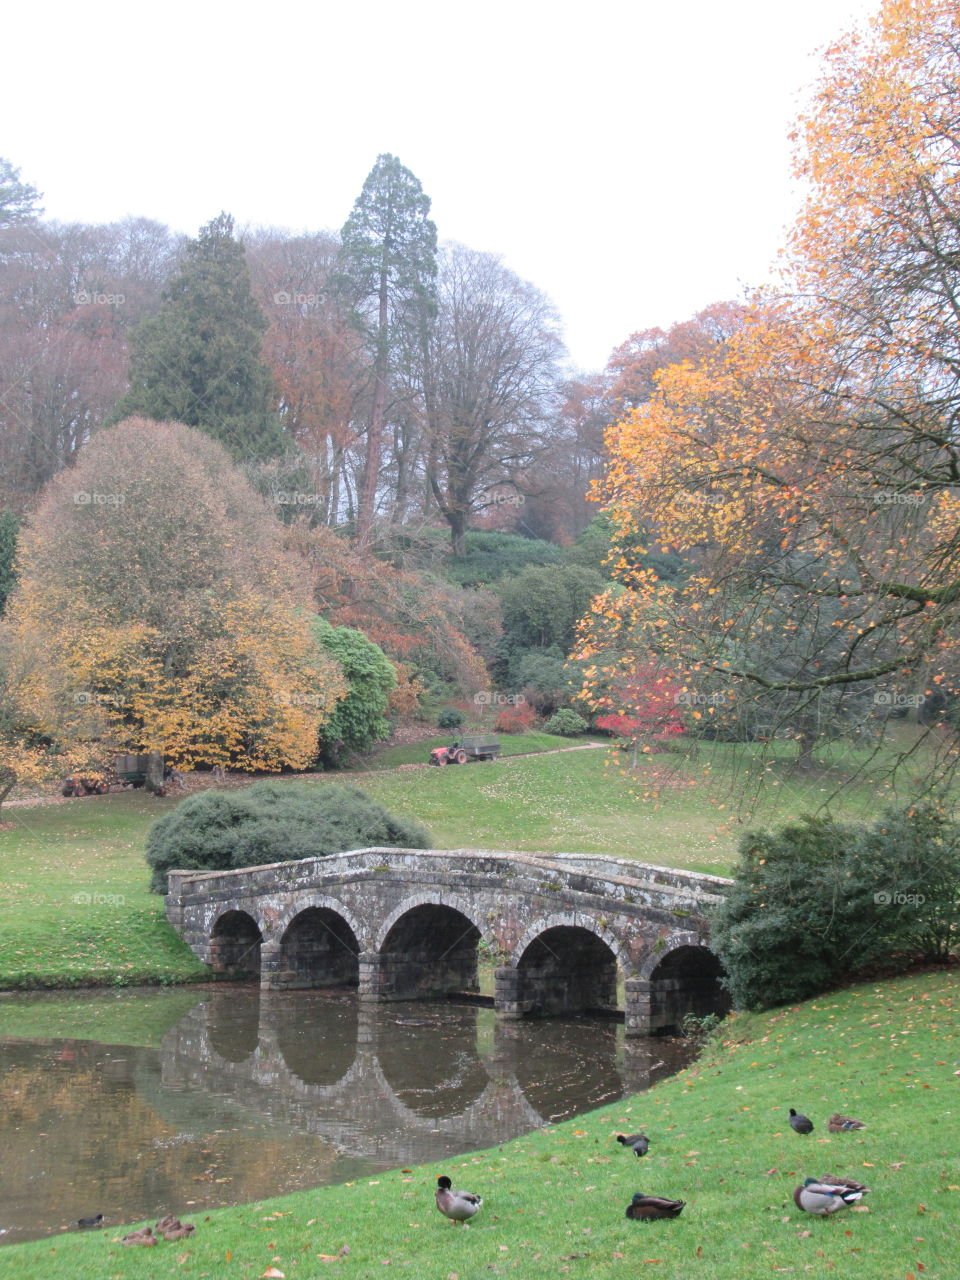 Stourhead national trust garden in the autumn and all the trees looking very colourful 🍁🍁